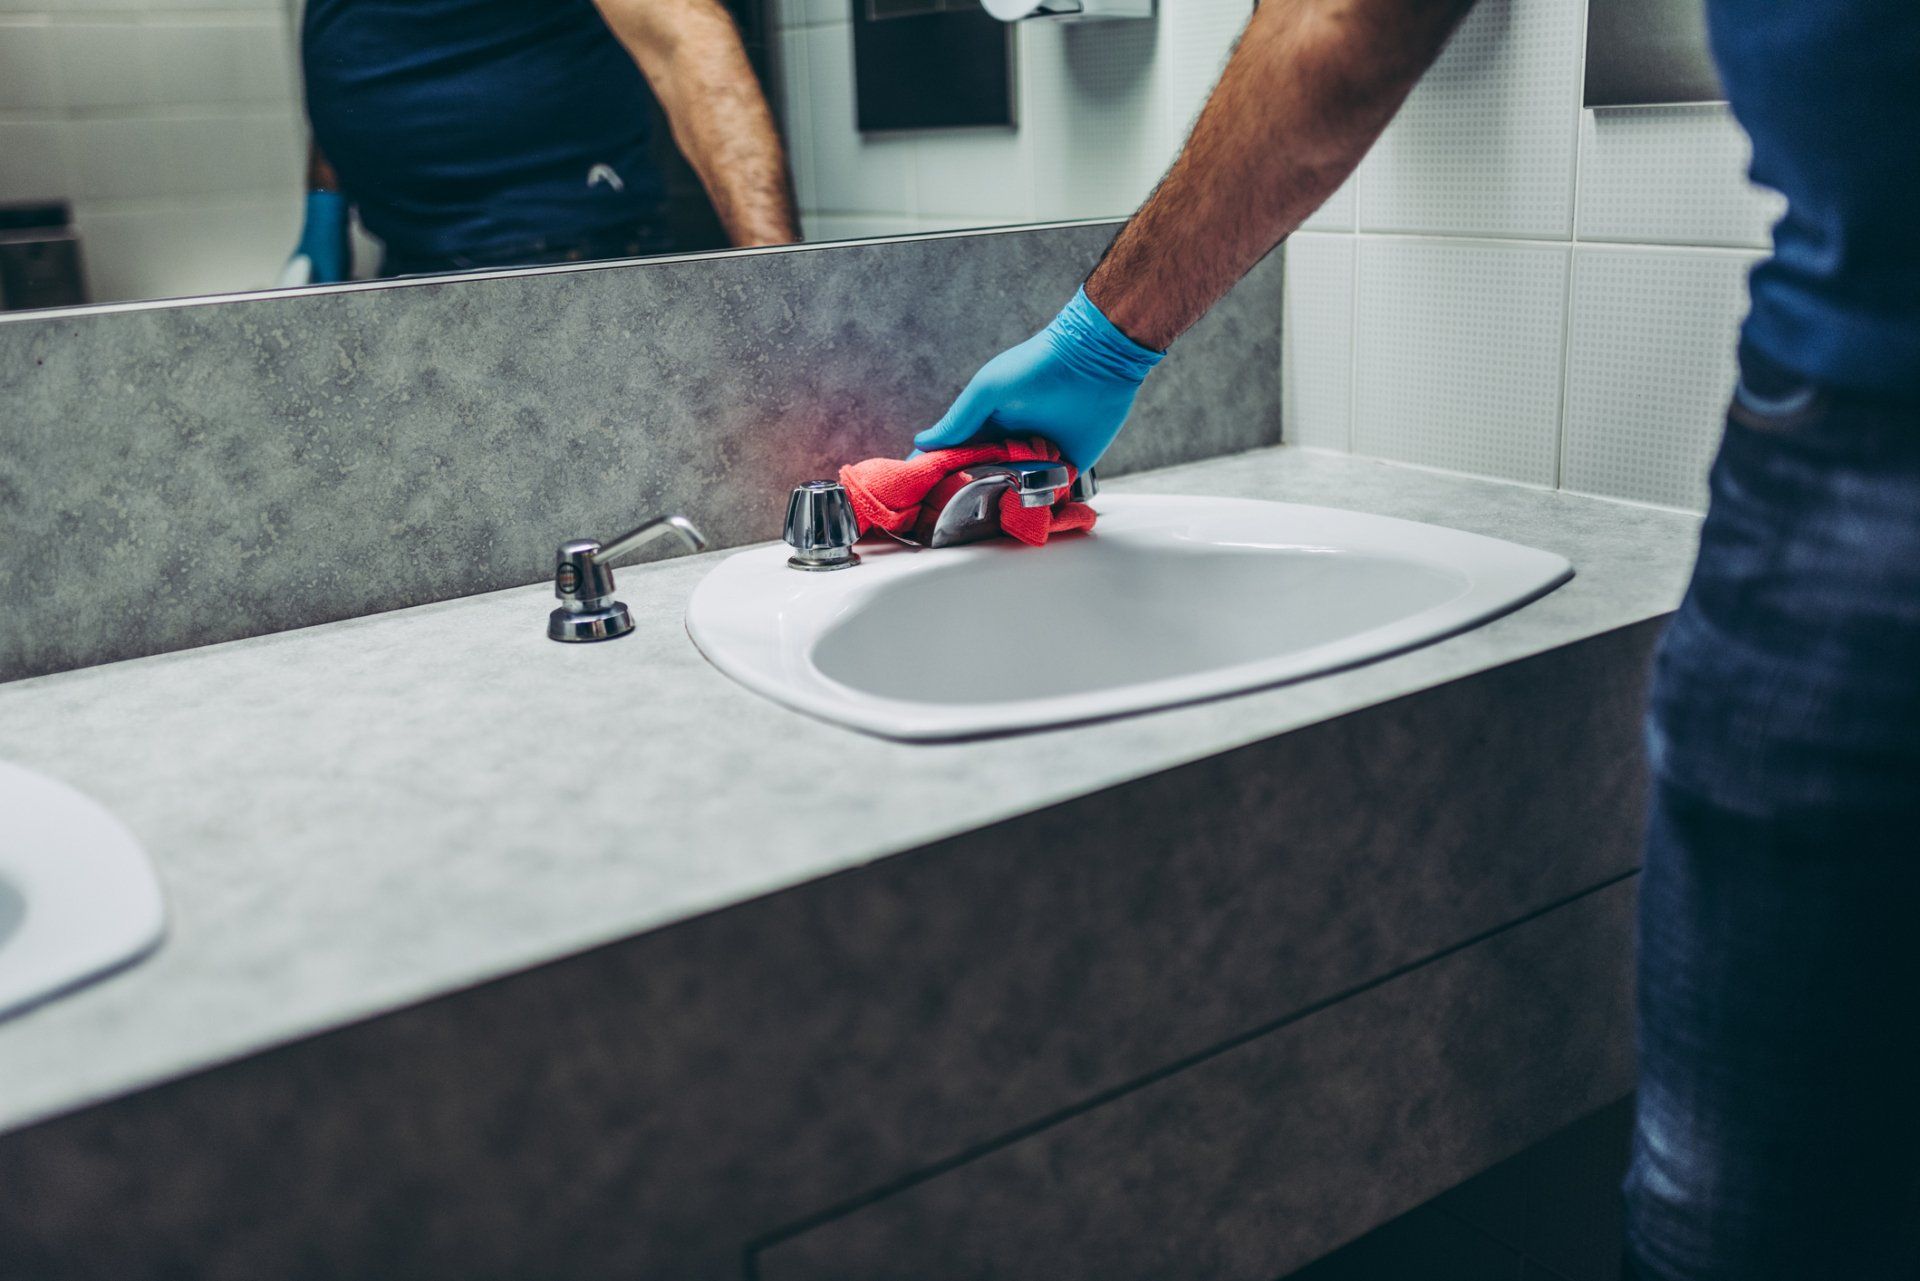 Janitor Cleaning the Bathroom – Fargo, ND - Automated Maintenance Services, Inc.